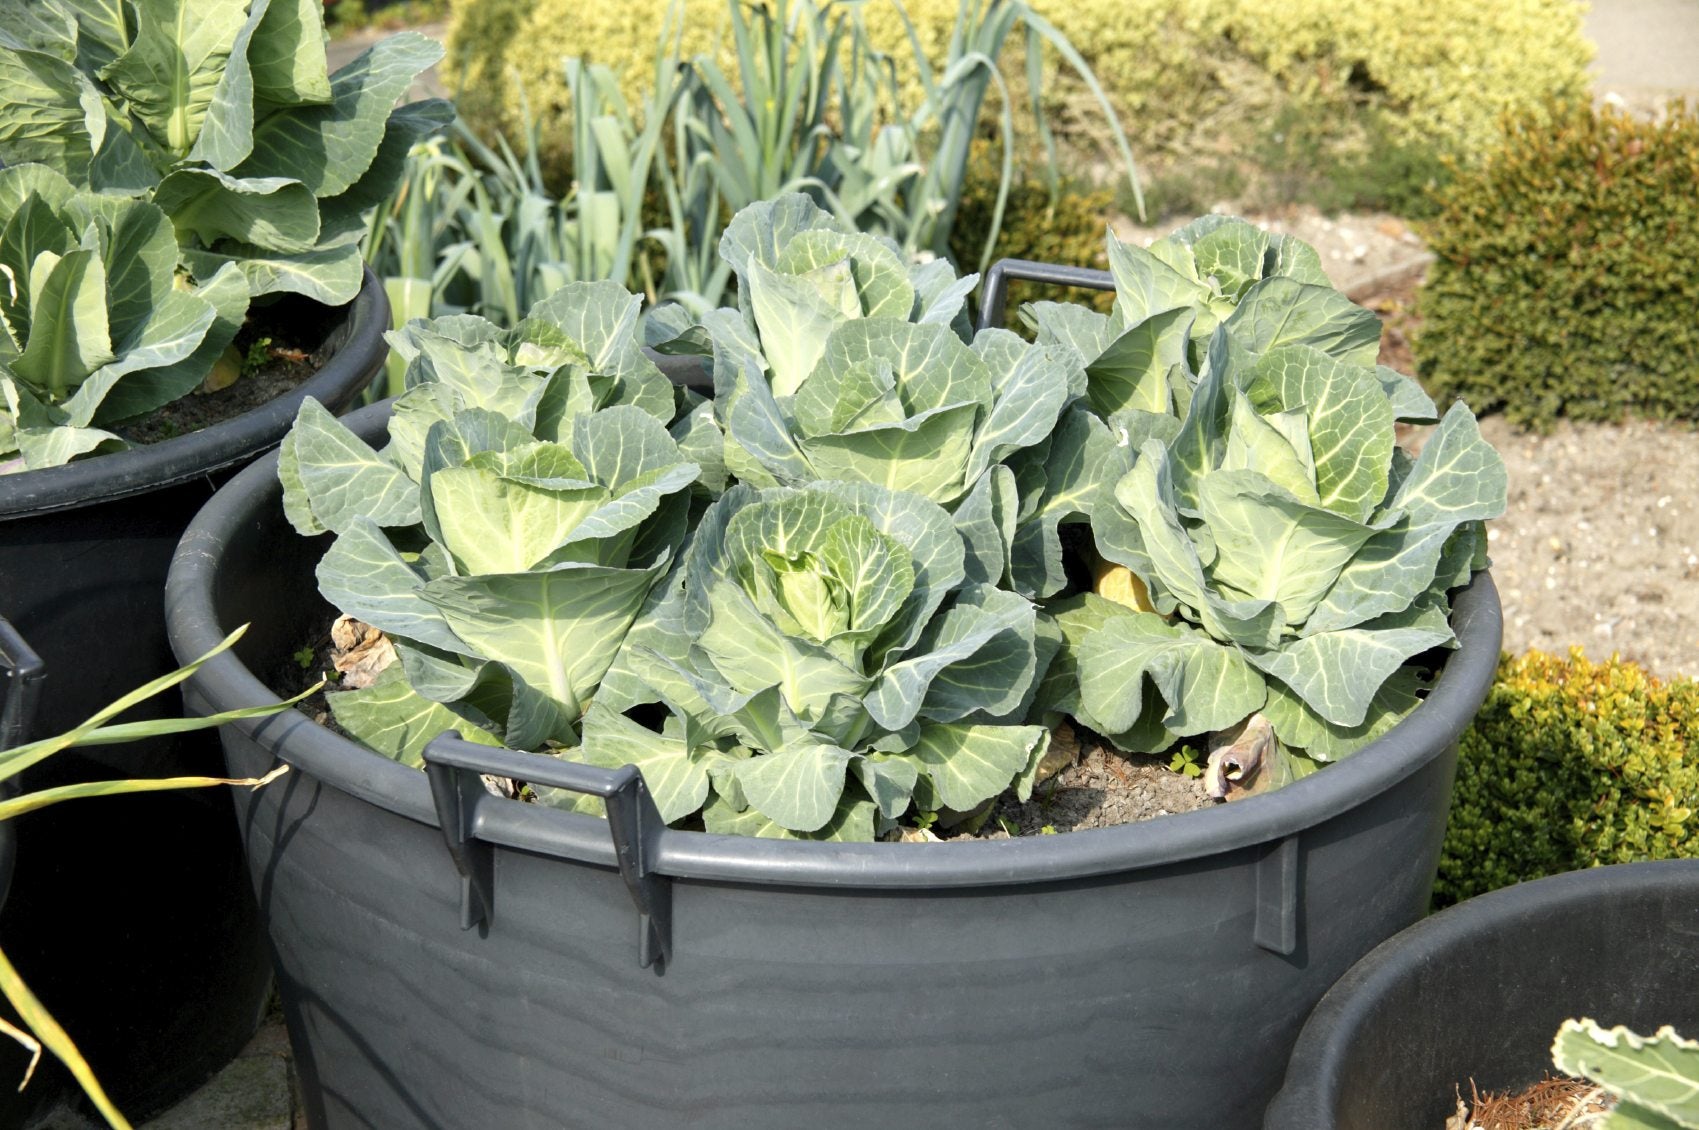 How to Grow Cabbage in Pots